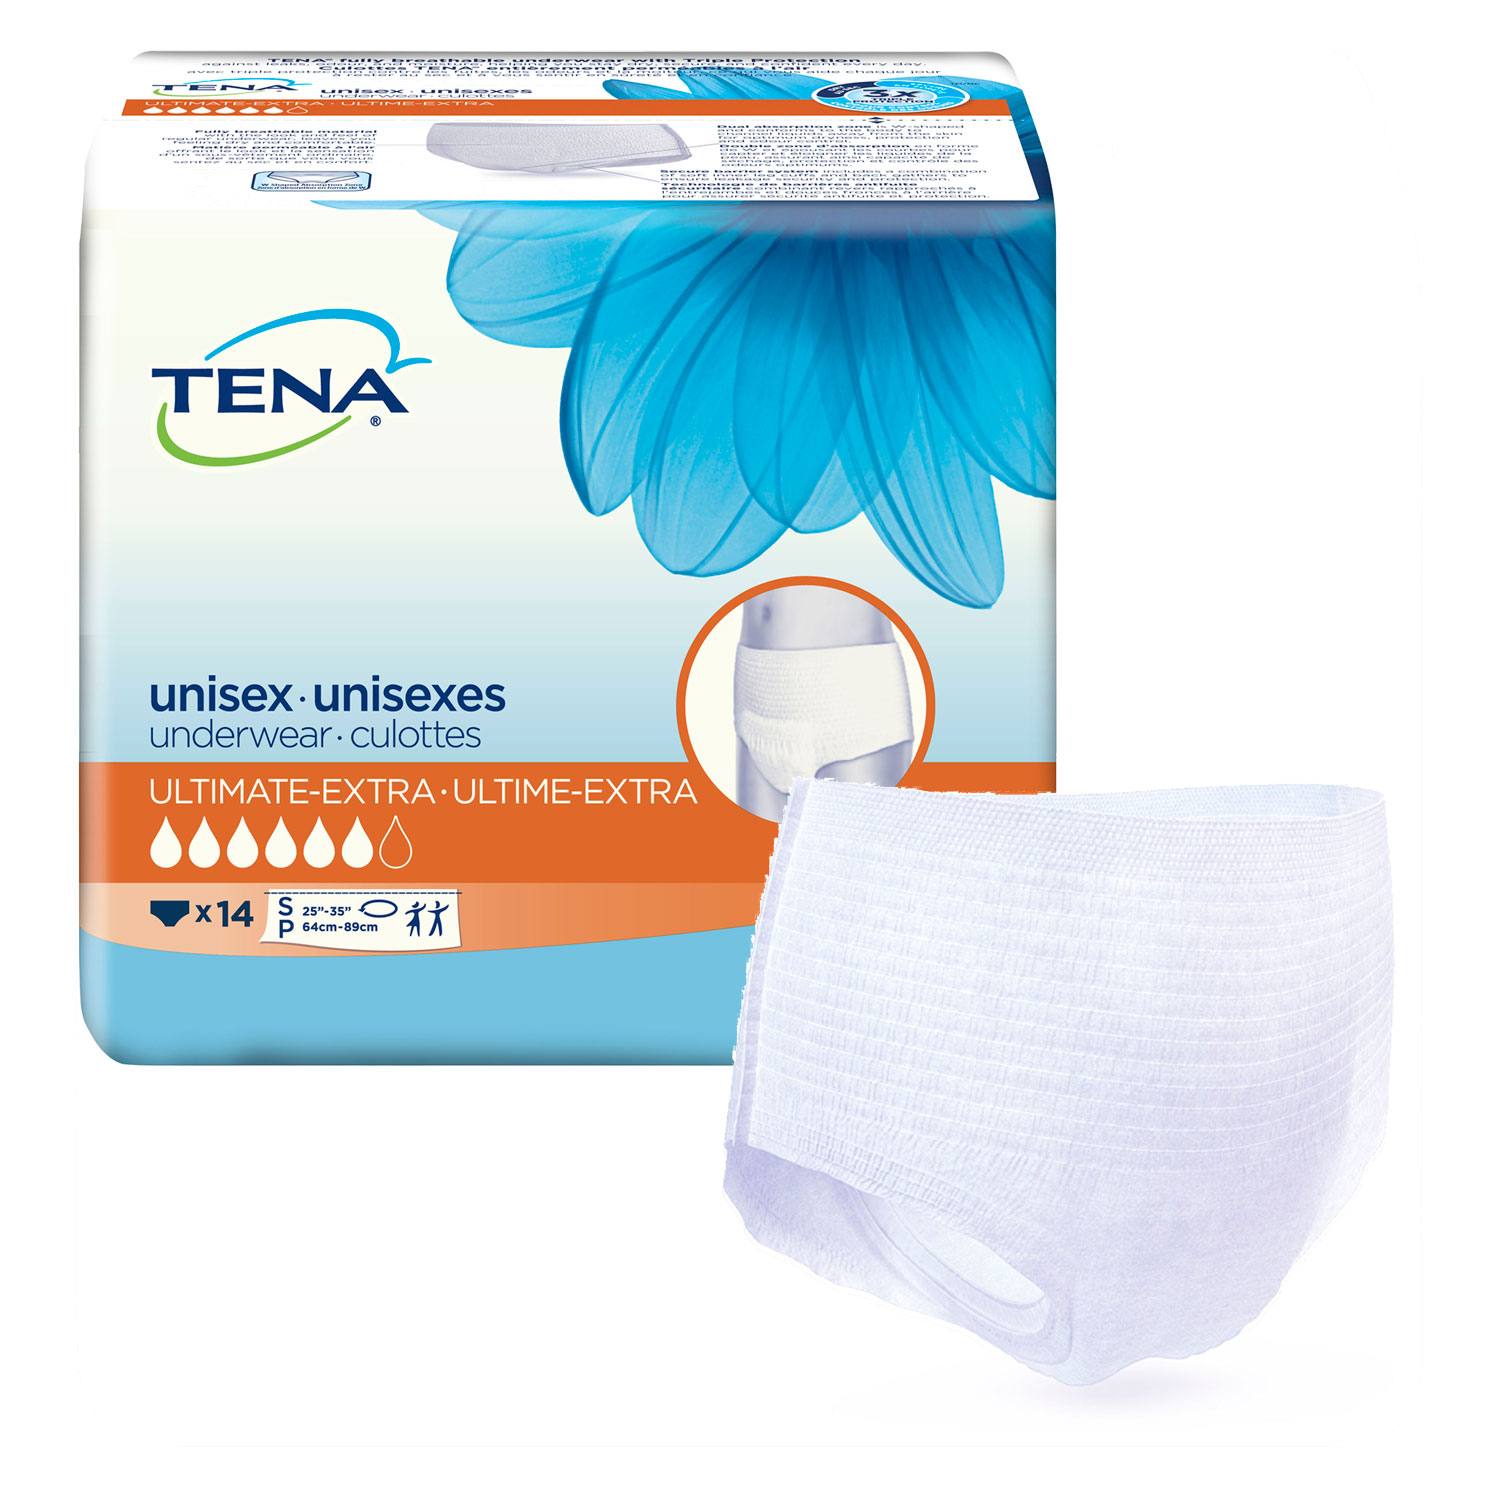  Tena Intimates Incontinence Overnight Underwear for Women, Size  Small / Medium, 16 ct : Health & Household